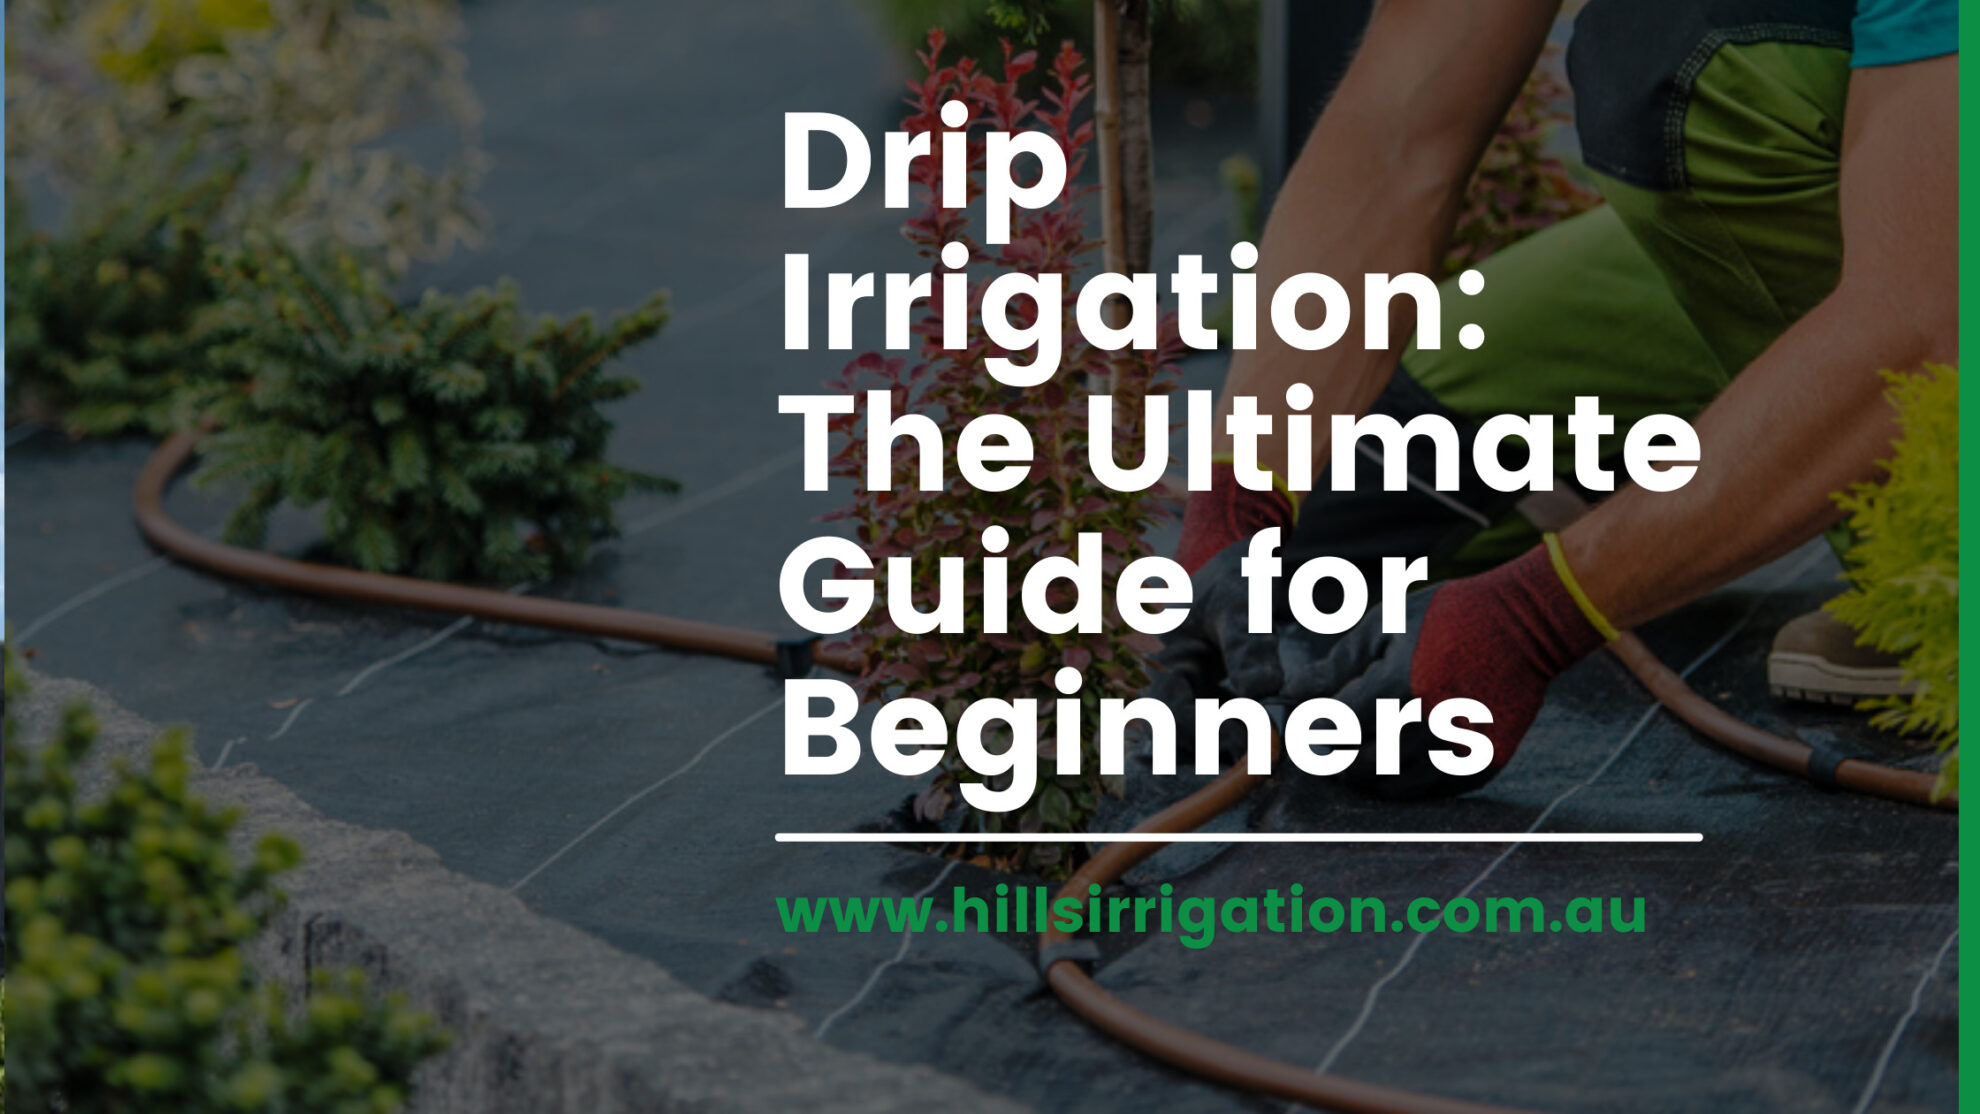 Drip Irrigation: The Ultimate Guide for Beginners - Hills